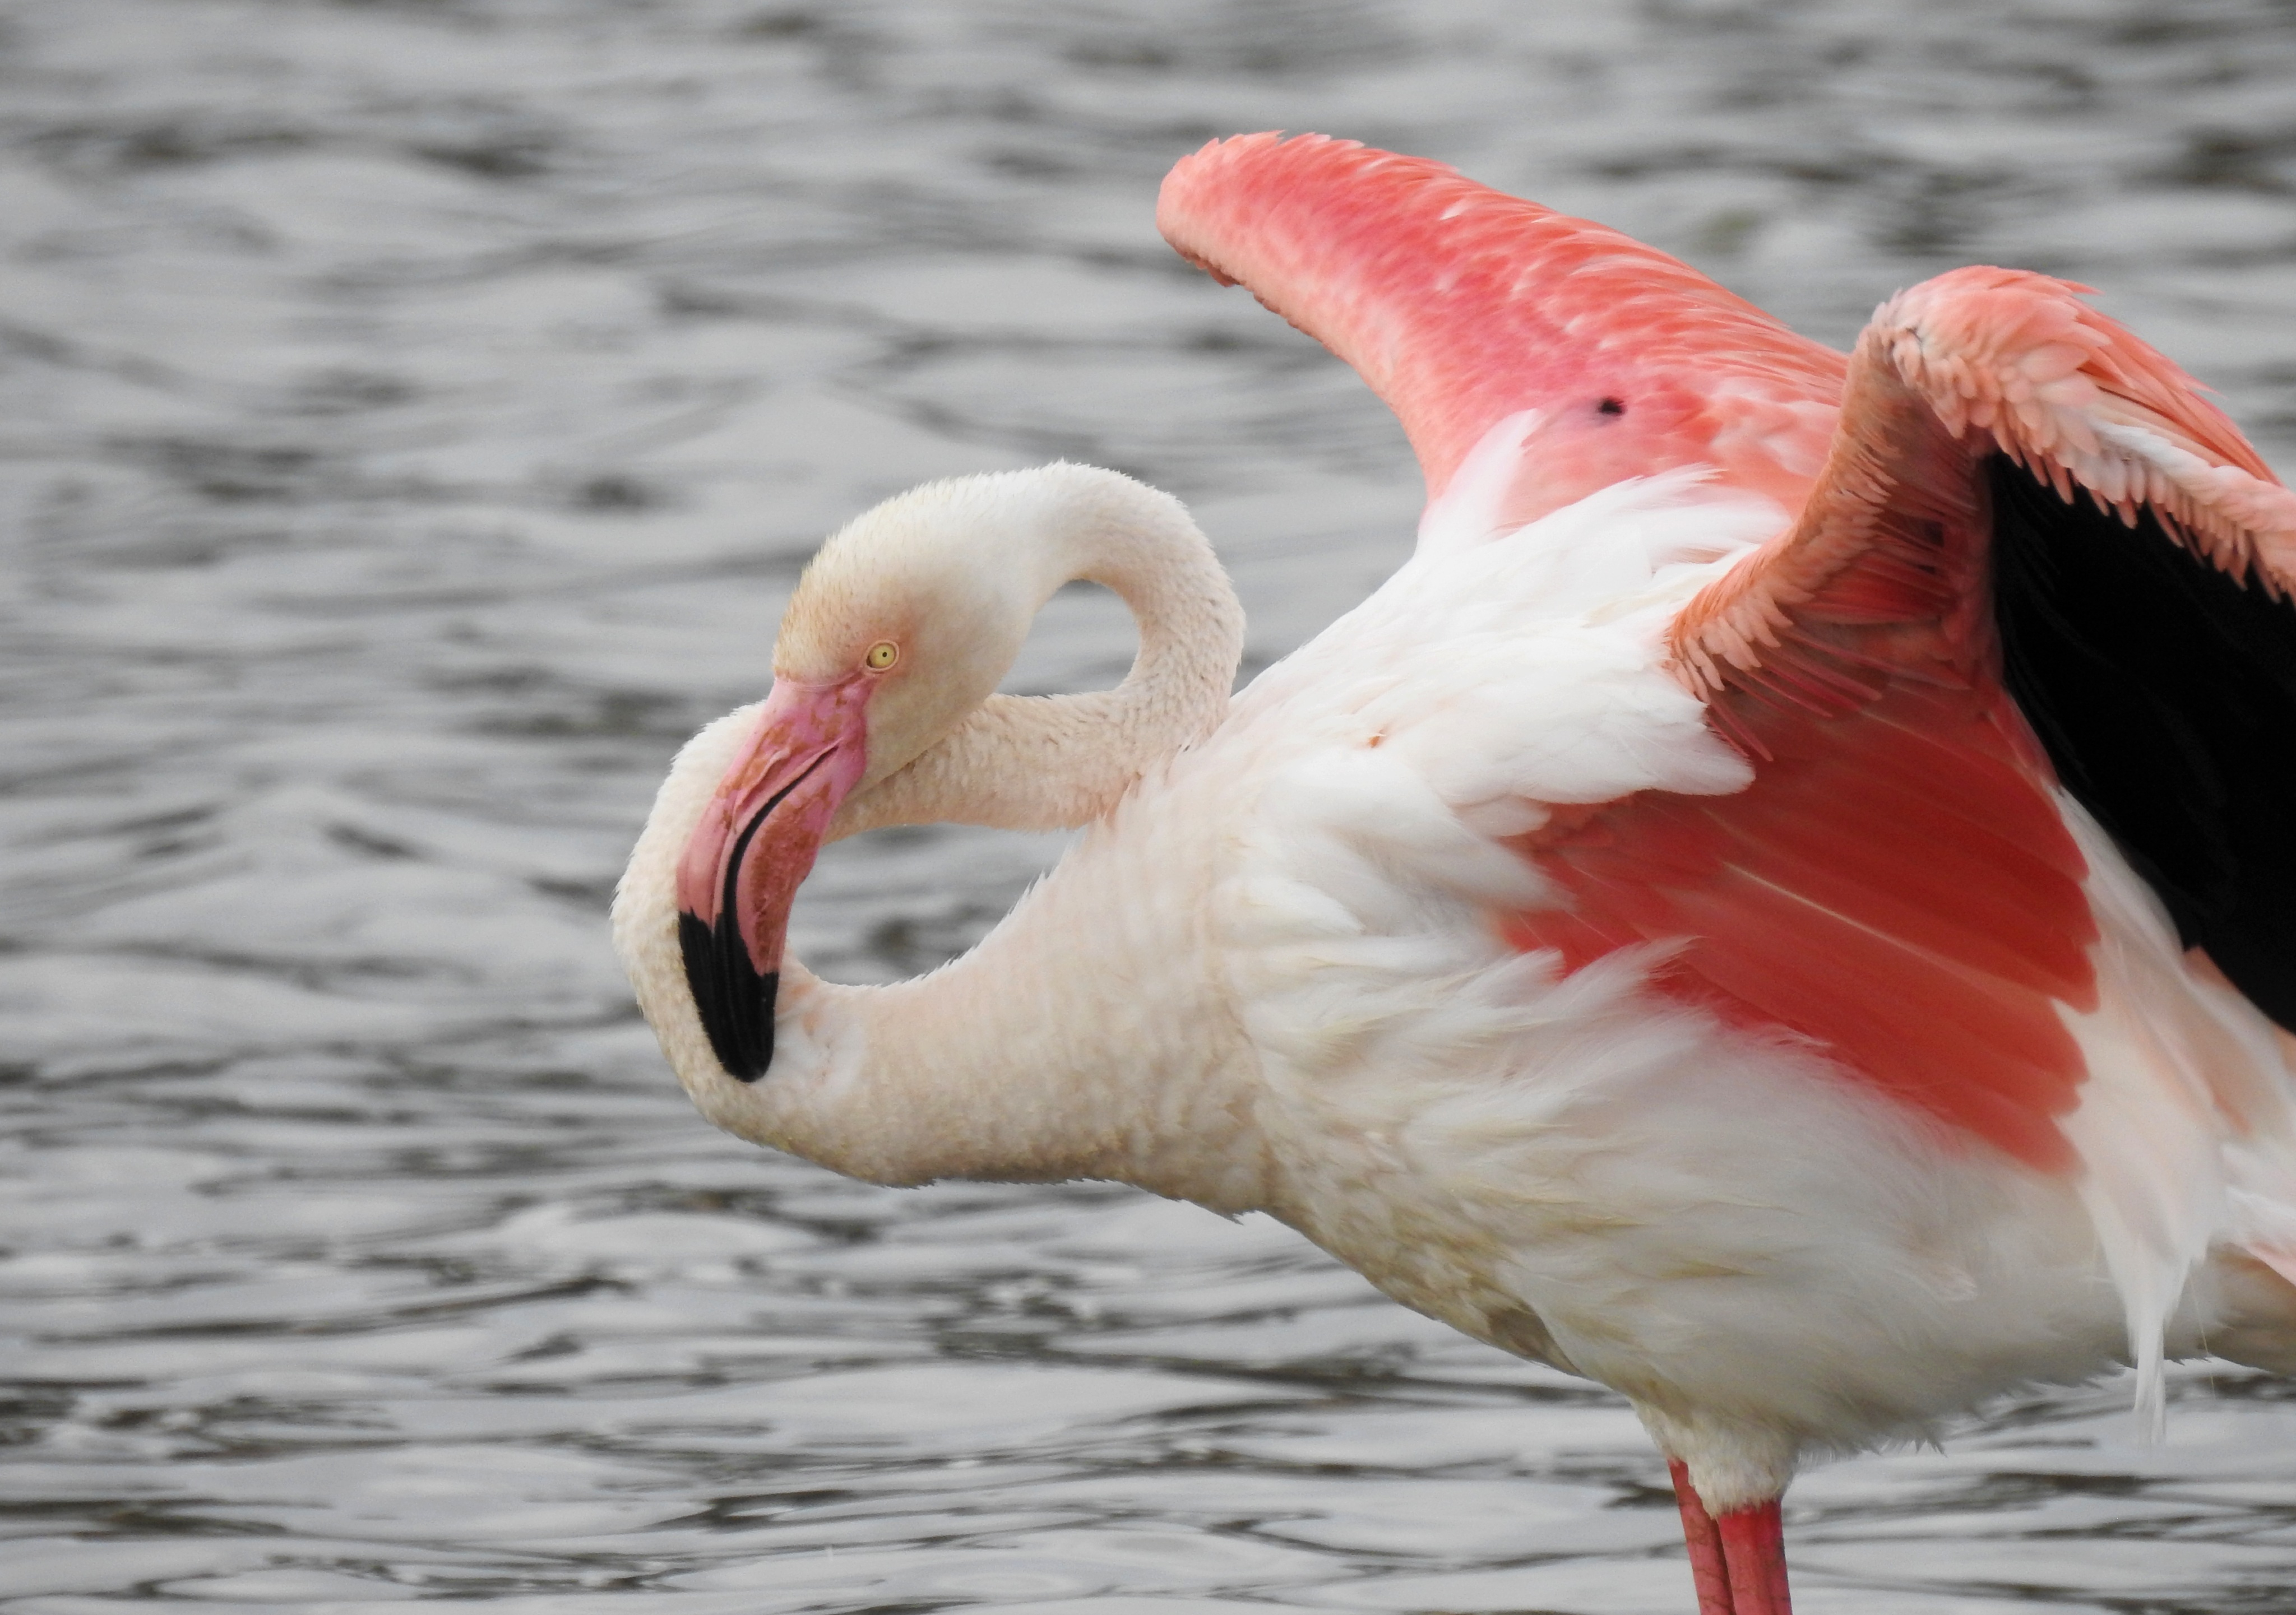 A greater flamingo showing off